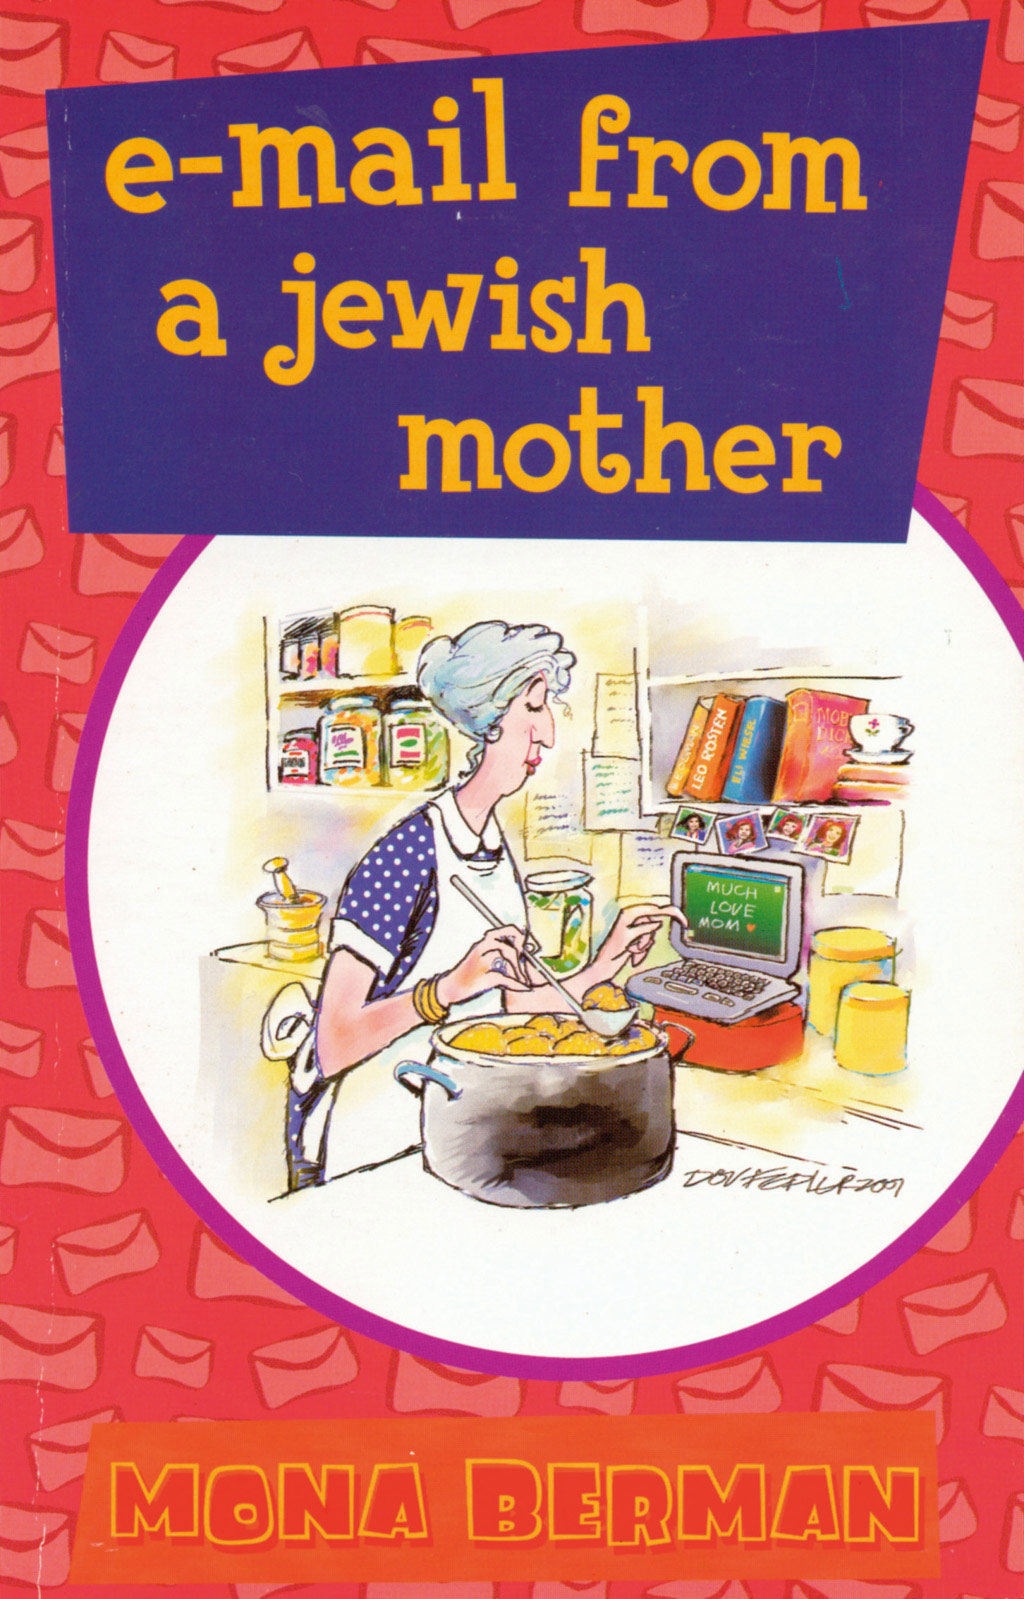 E-MAIL FROM A JEWISH MOTHER